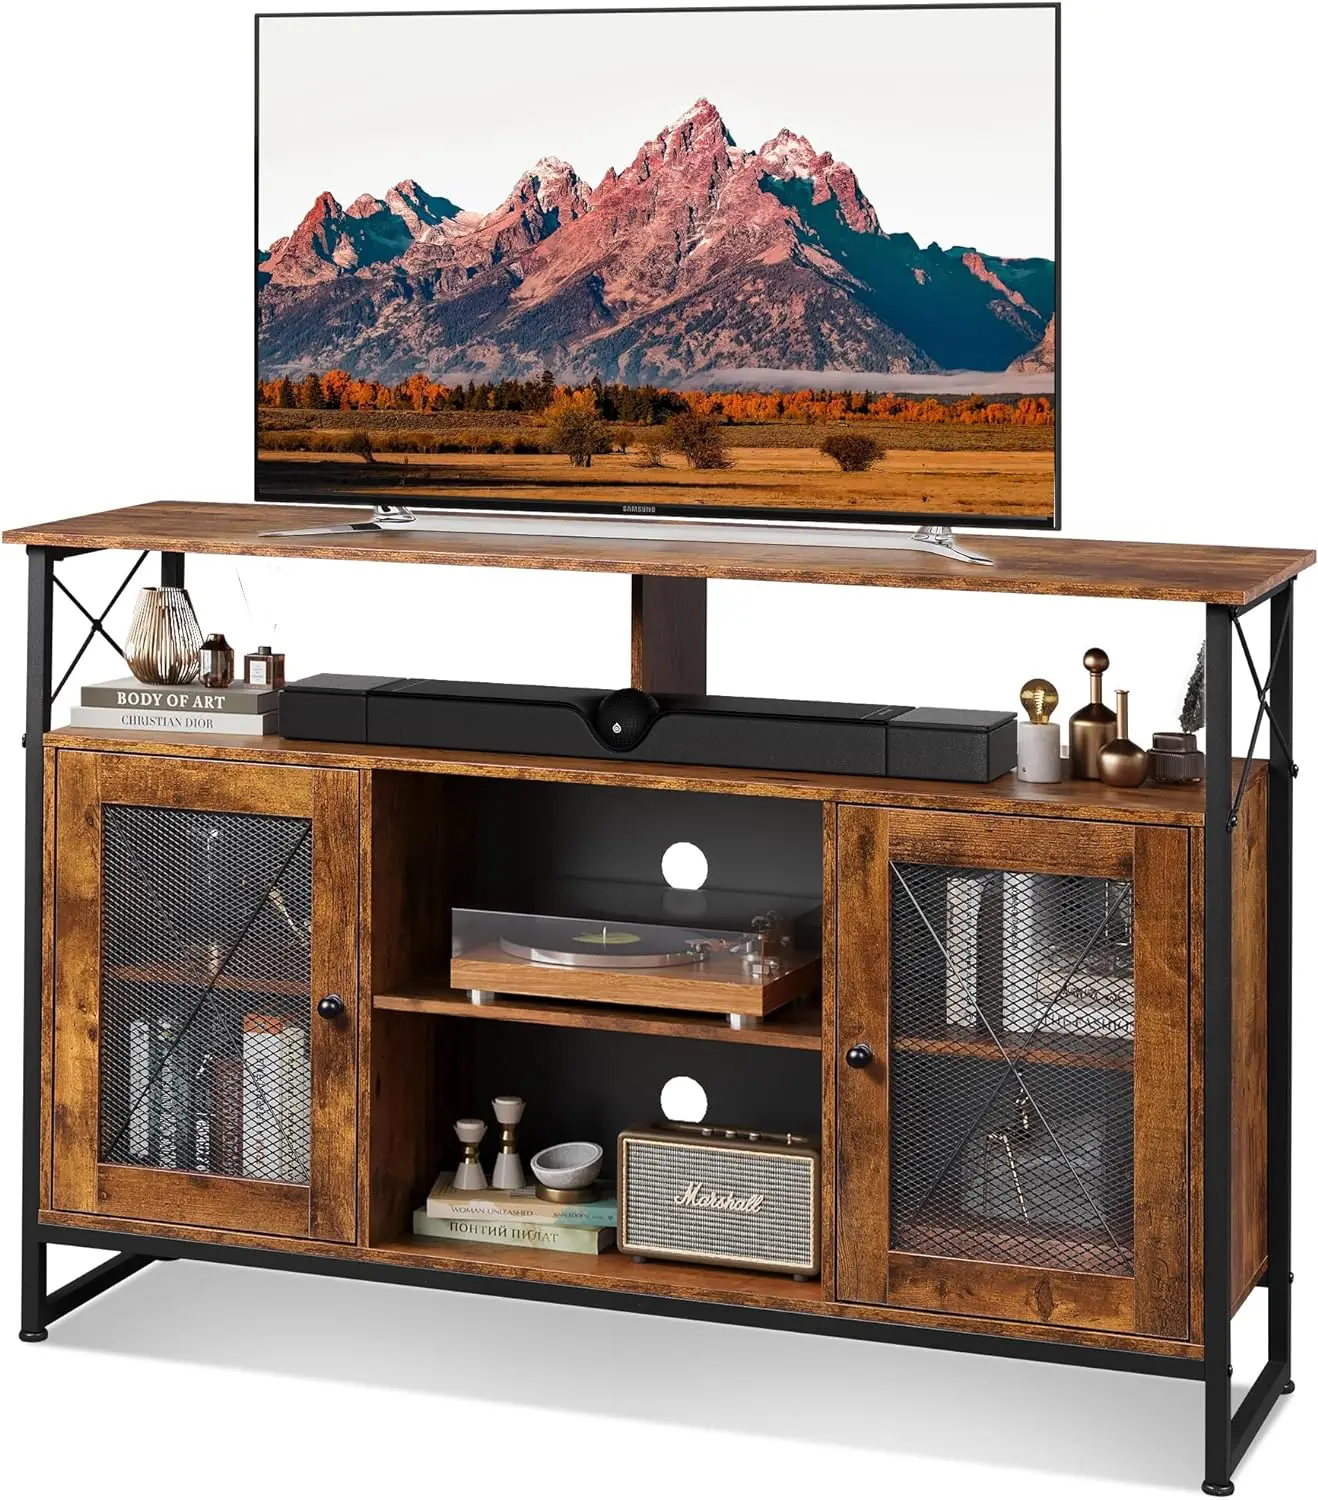 

TV Stand 55 inch TV,Tall Entertainment Center with Storage, Farmhouse Industrial TV Console for Bedroom Living Room,Rustic Brown